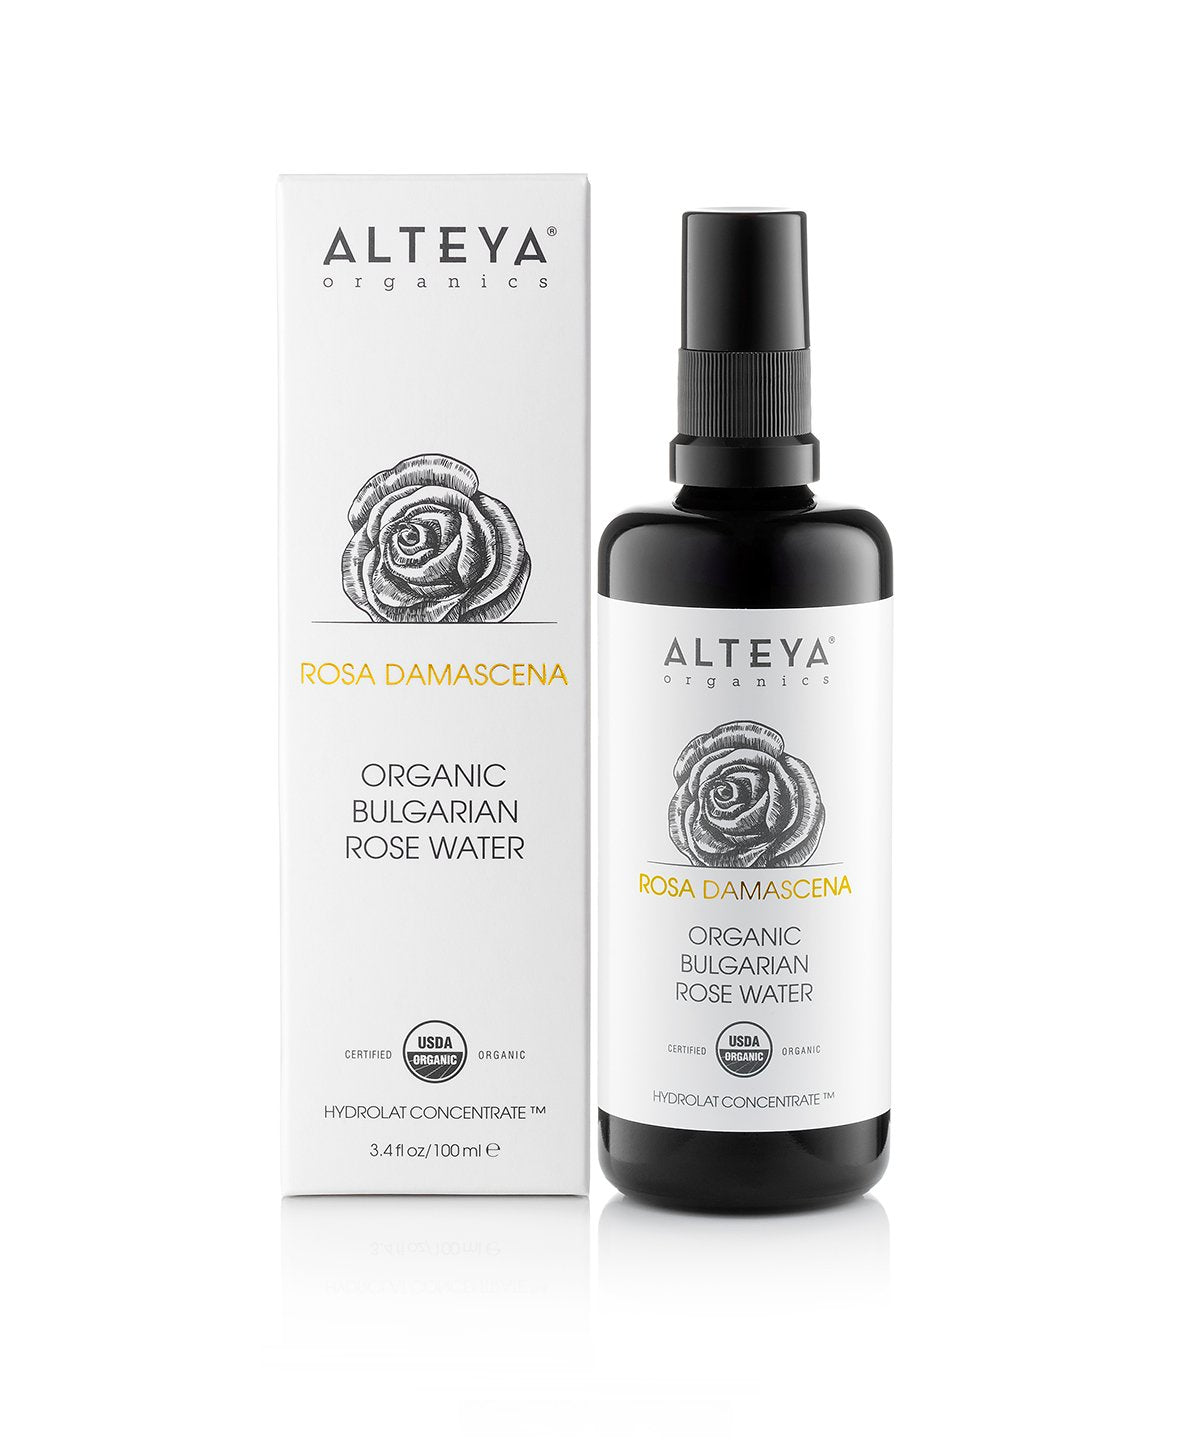 Alteya Organics' Organic Toner Mist 3.4 Fl Oz - Rose Water Violet Glass spray is a must-have for anyone looking to enhance their skincare routine. Made with purely organic ingredients, this rose water is the perfect addition to a natural and effective skincare regimen.